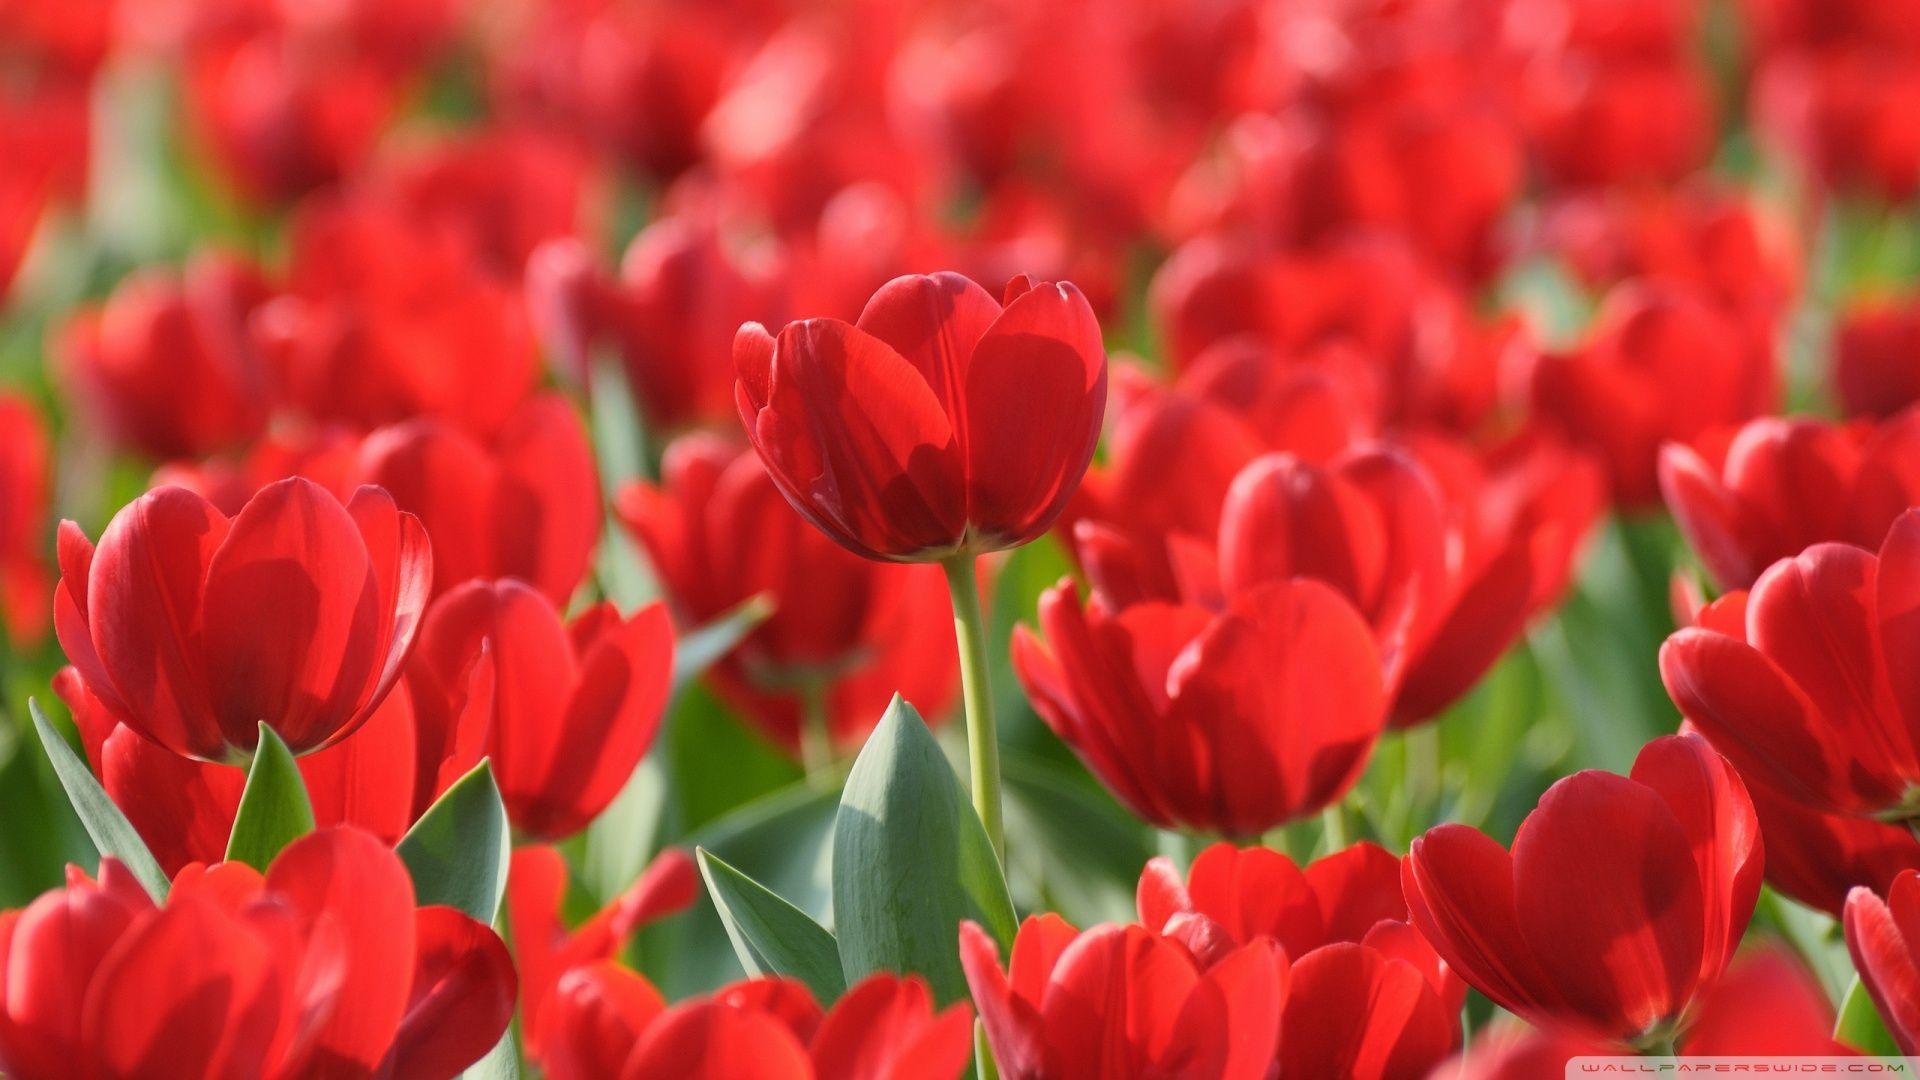 Download Red Tulips Wallpaper 1920x1080 #